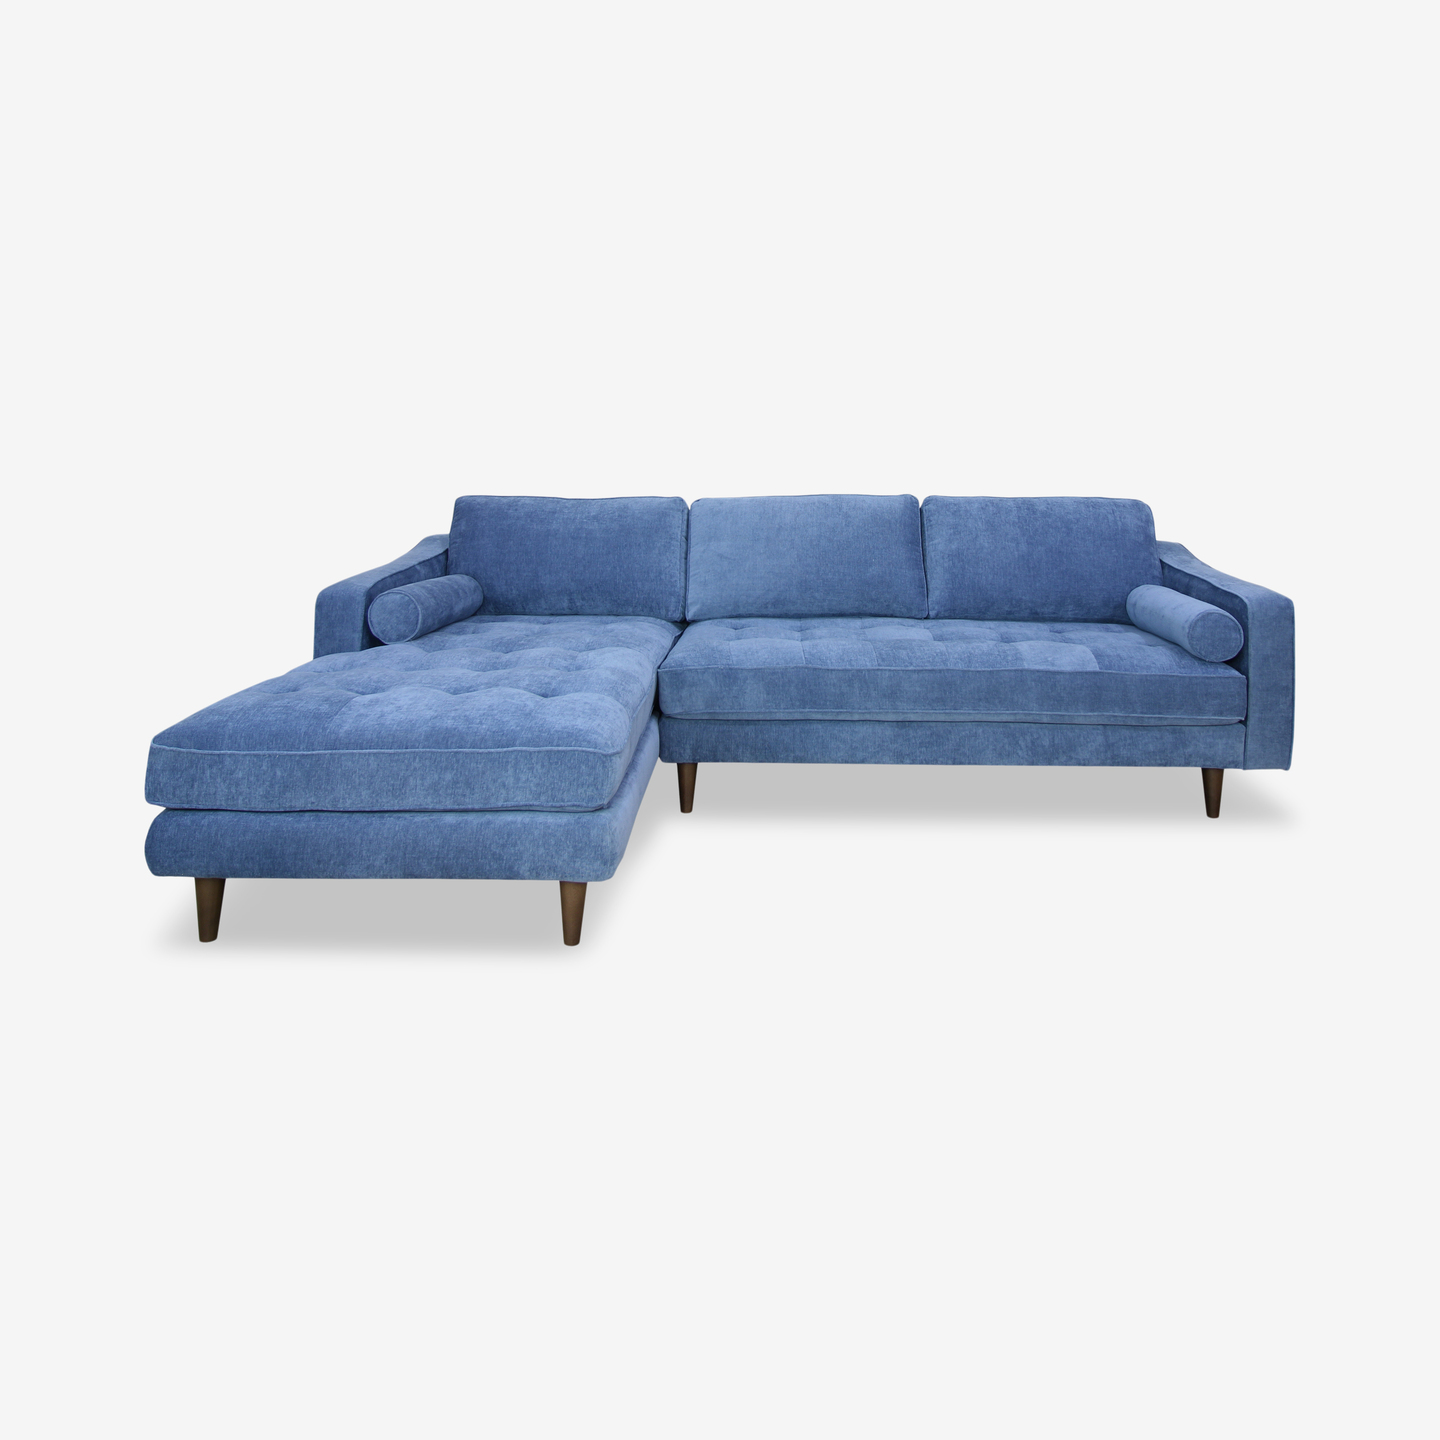 1180_Martell-Sectional-LHF-Blue_front_2020